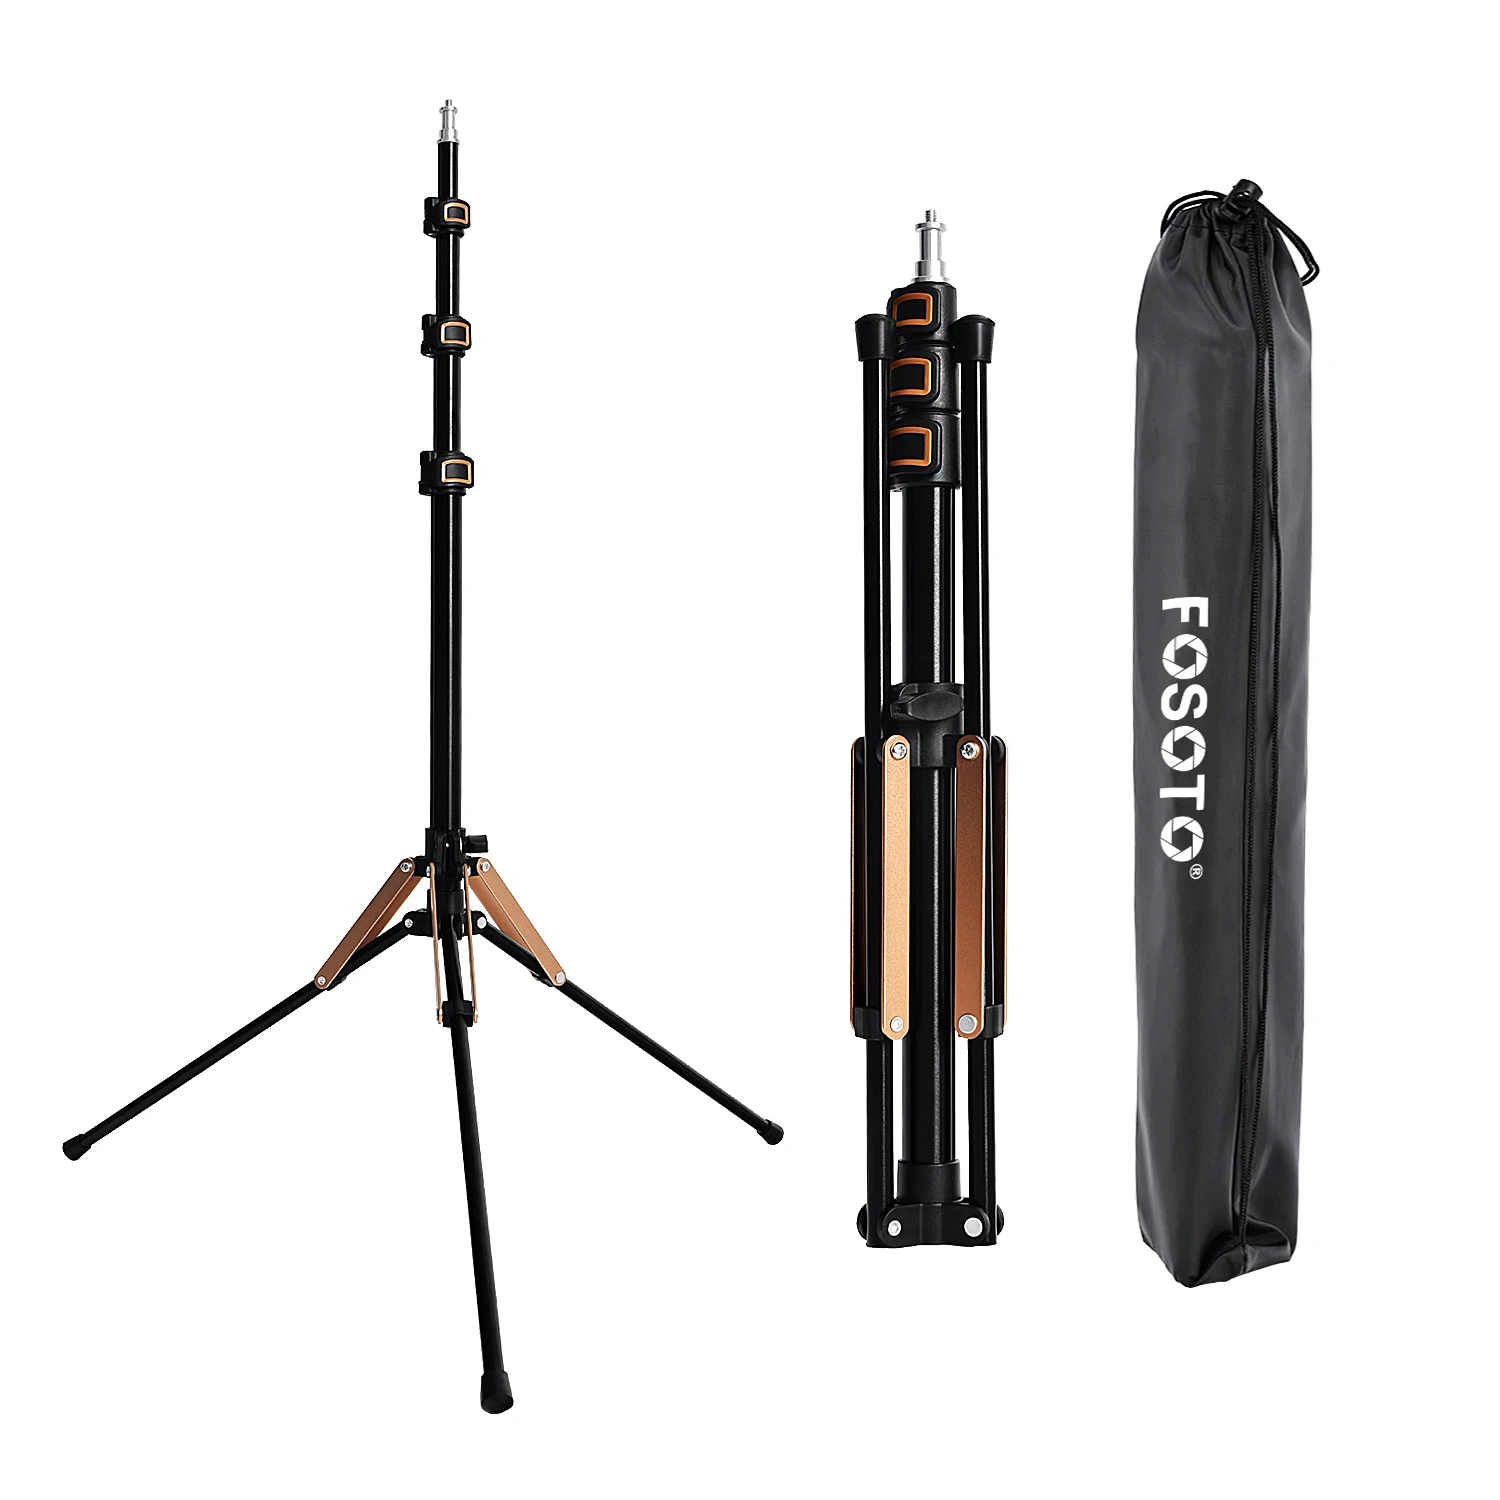 FOSOTO FT-195 Light Stand